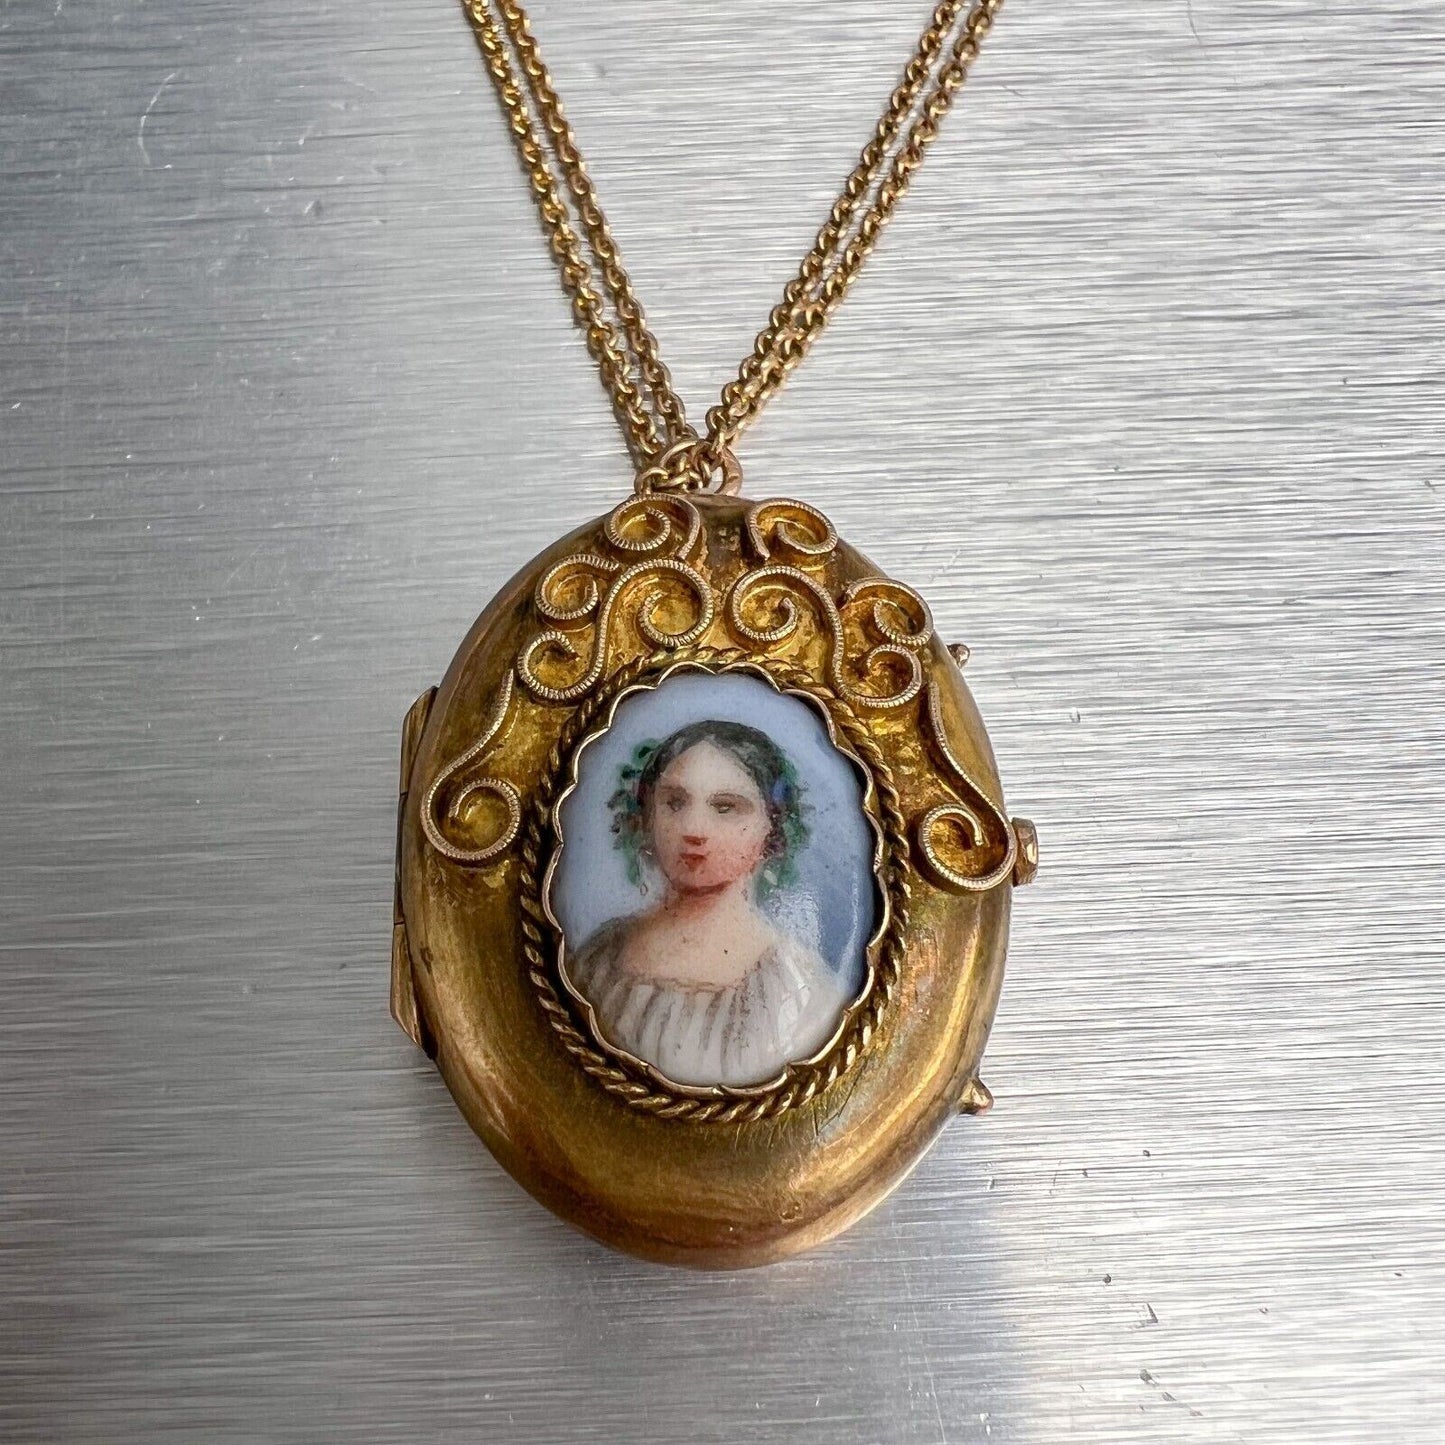 Antique Victorian 14k Yellow Gold Painted Porcelain Cameo Locket Necklace 28"